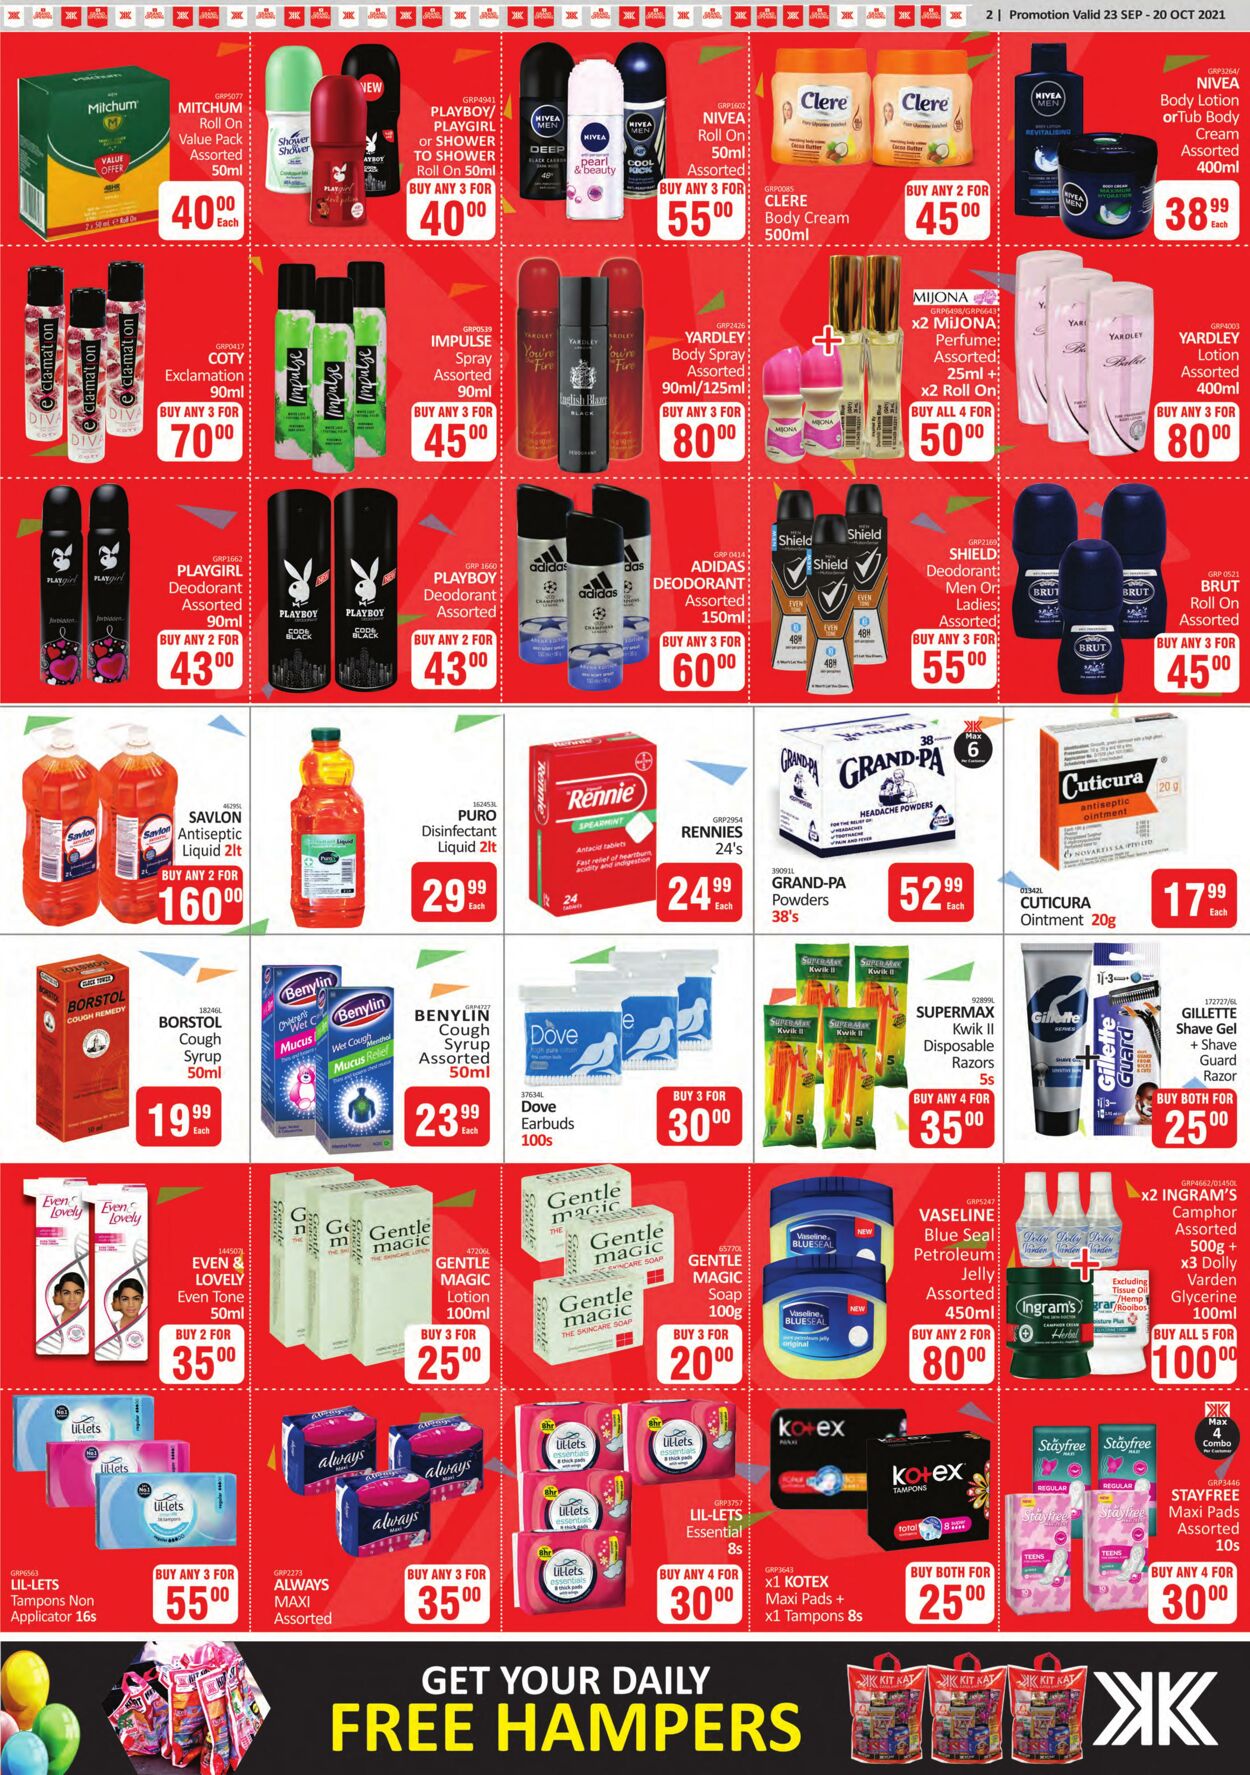 Kit Kat Cash and Carry Promotional Leaflet - Valid from 23.12 to 20.12 ...